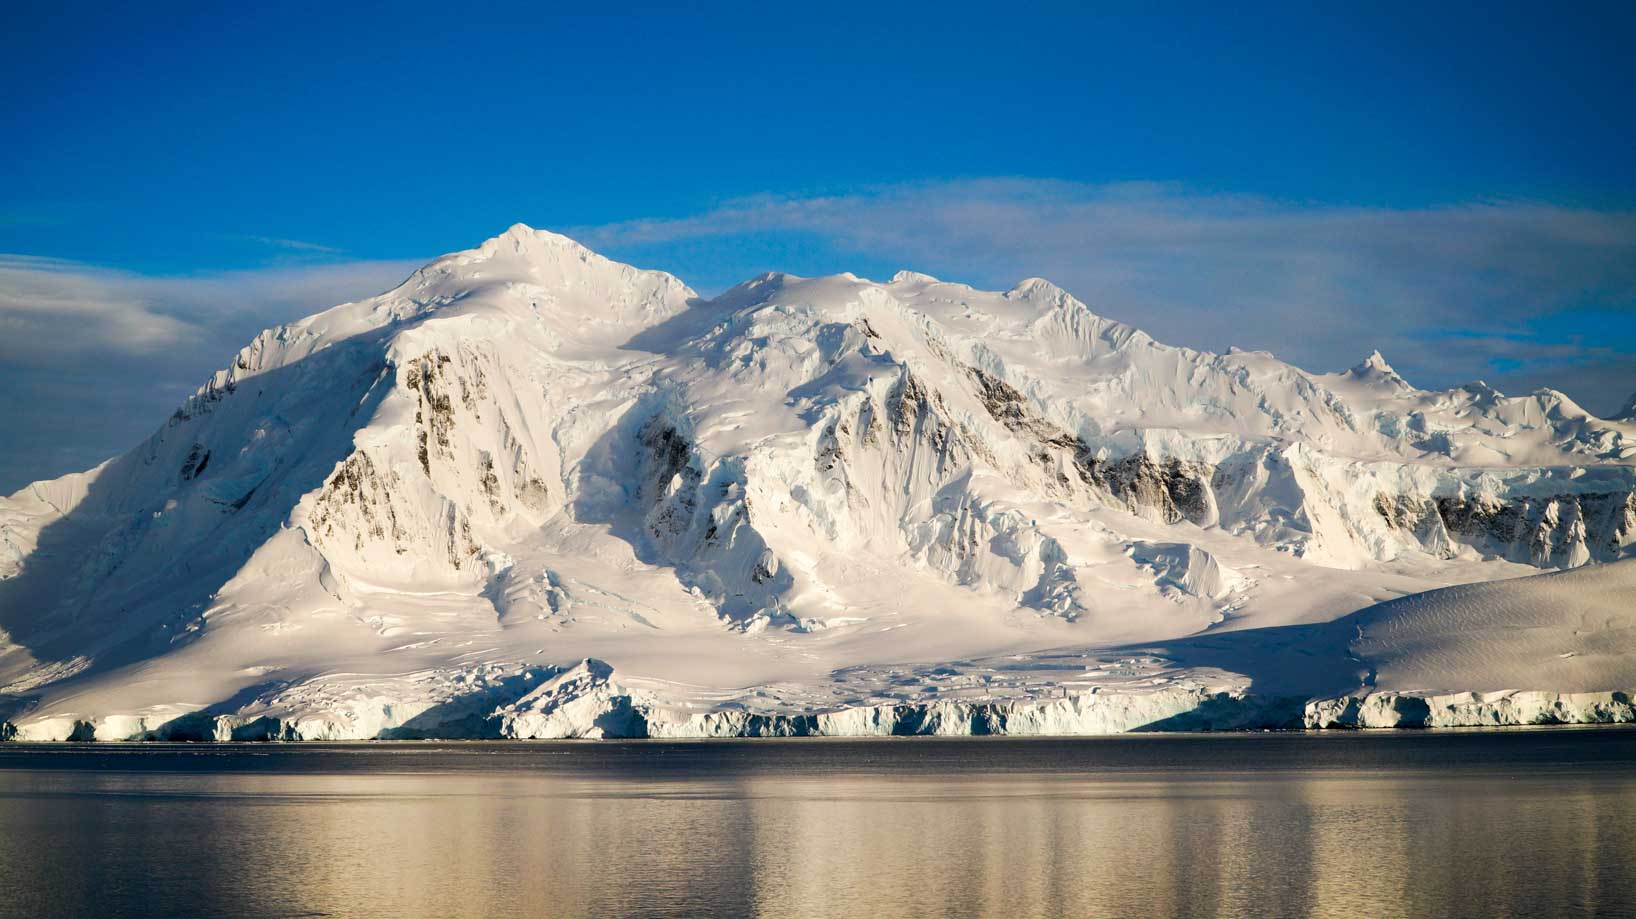 Snow capped mountains in Antarctica.